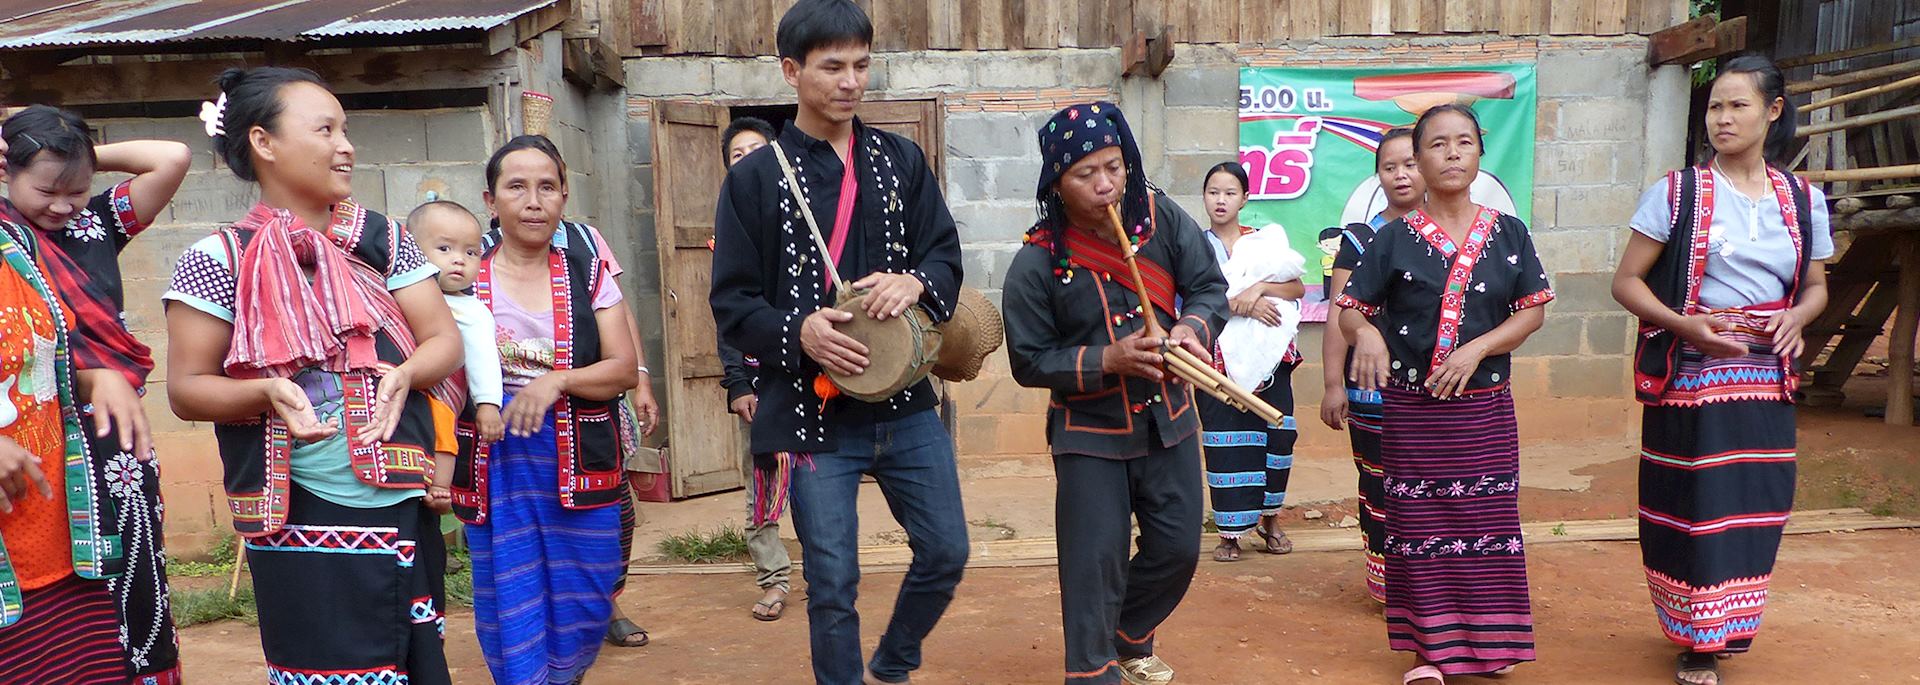 Lahu tribe dancing with musical instruments